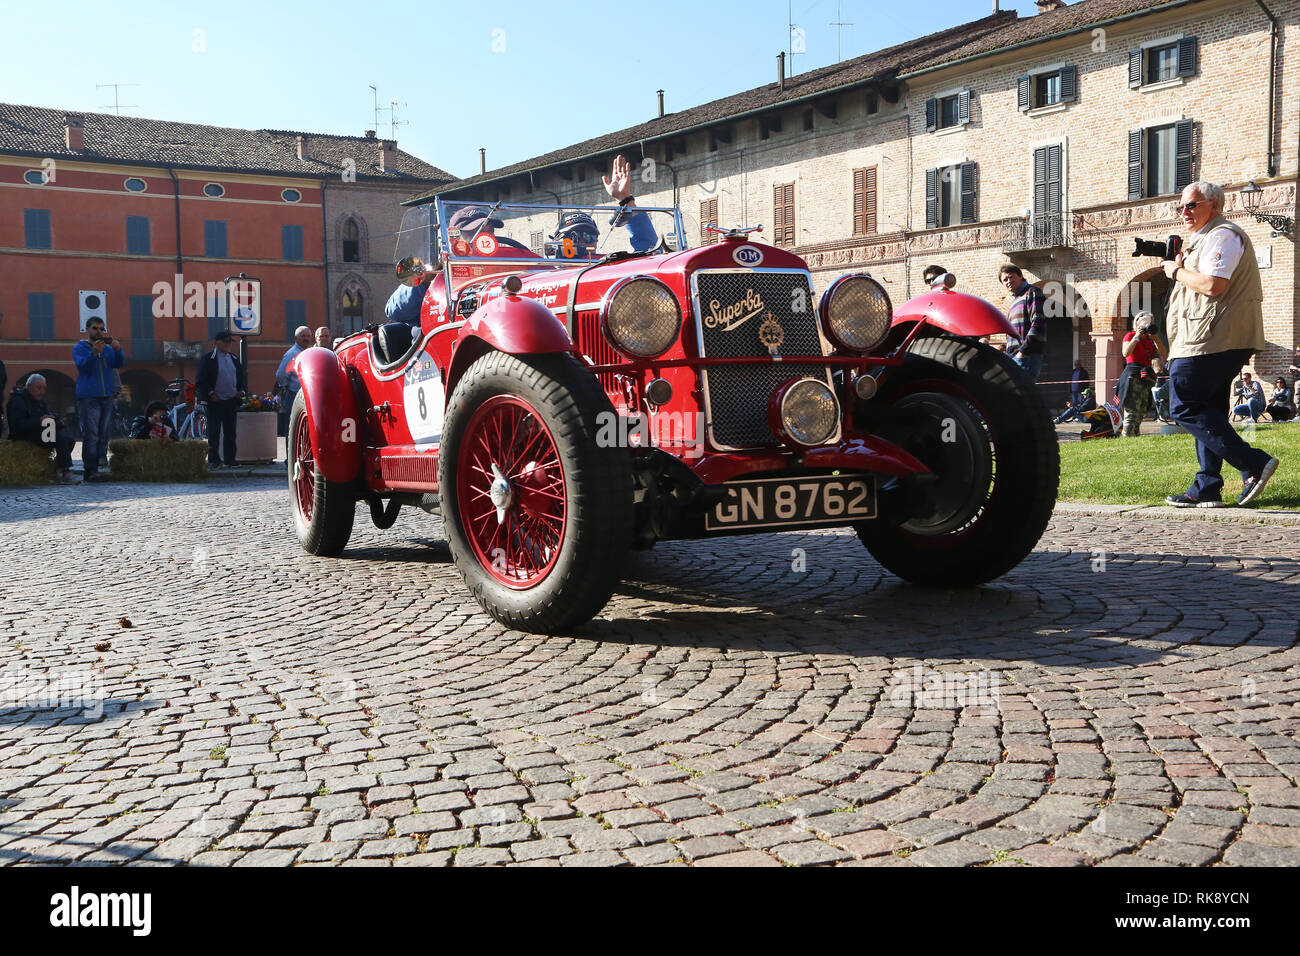 Busseto, Italy - May 21, 2017: Old OM car during Mille Miglia regularity race Stock Photo